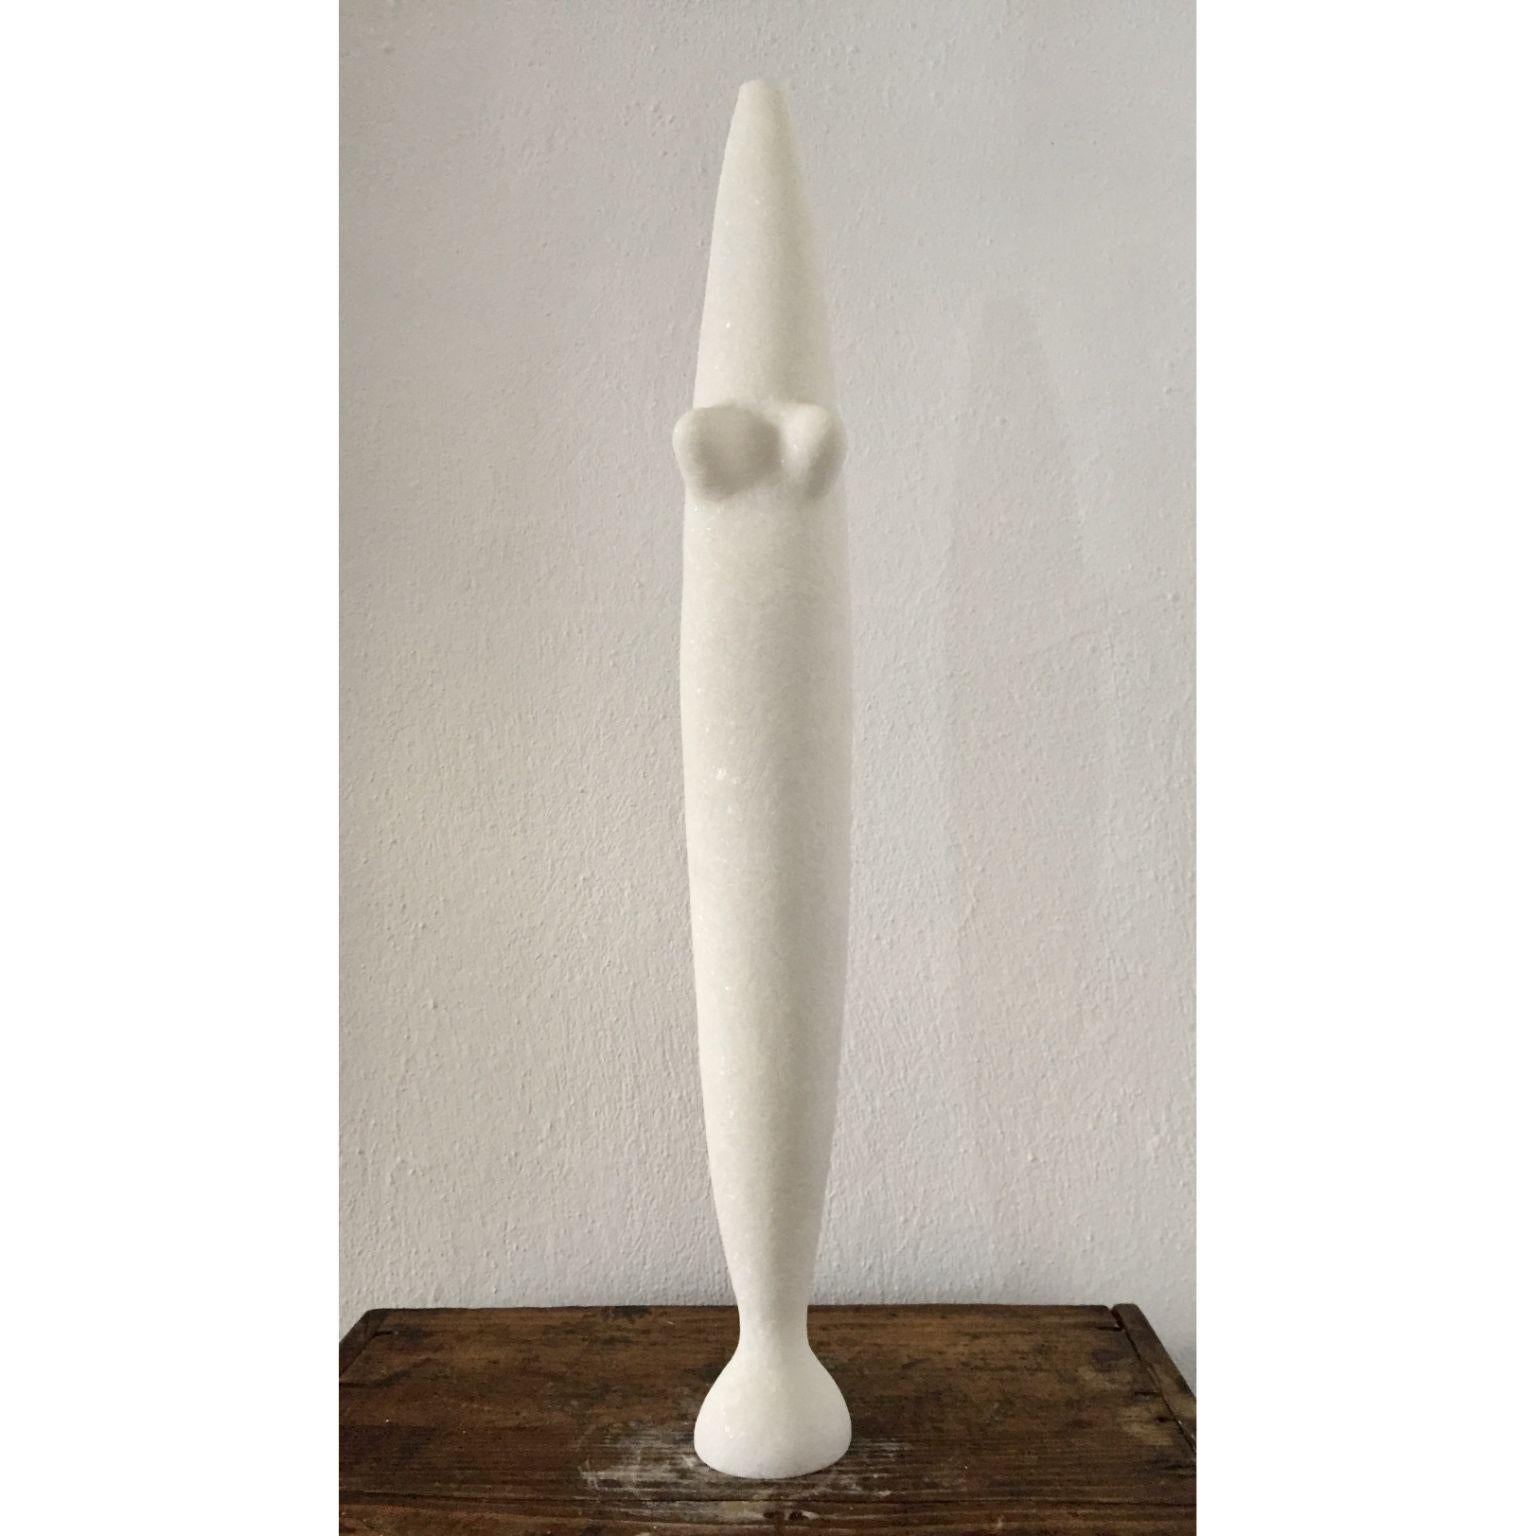 Aphrodite hand carved marble sculpture by Tom Von Kaenel.
Dimensions: D 8 x H 60 cm.
Materials: marble.

Tom von Kaenel, sculptor and painter, was born in Switzerland in 1961. Already in his early
childhood he was deeply devoted to art. His